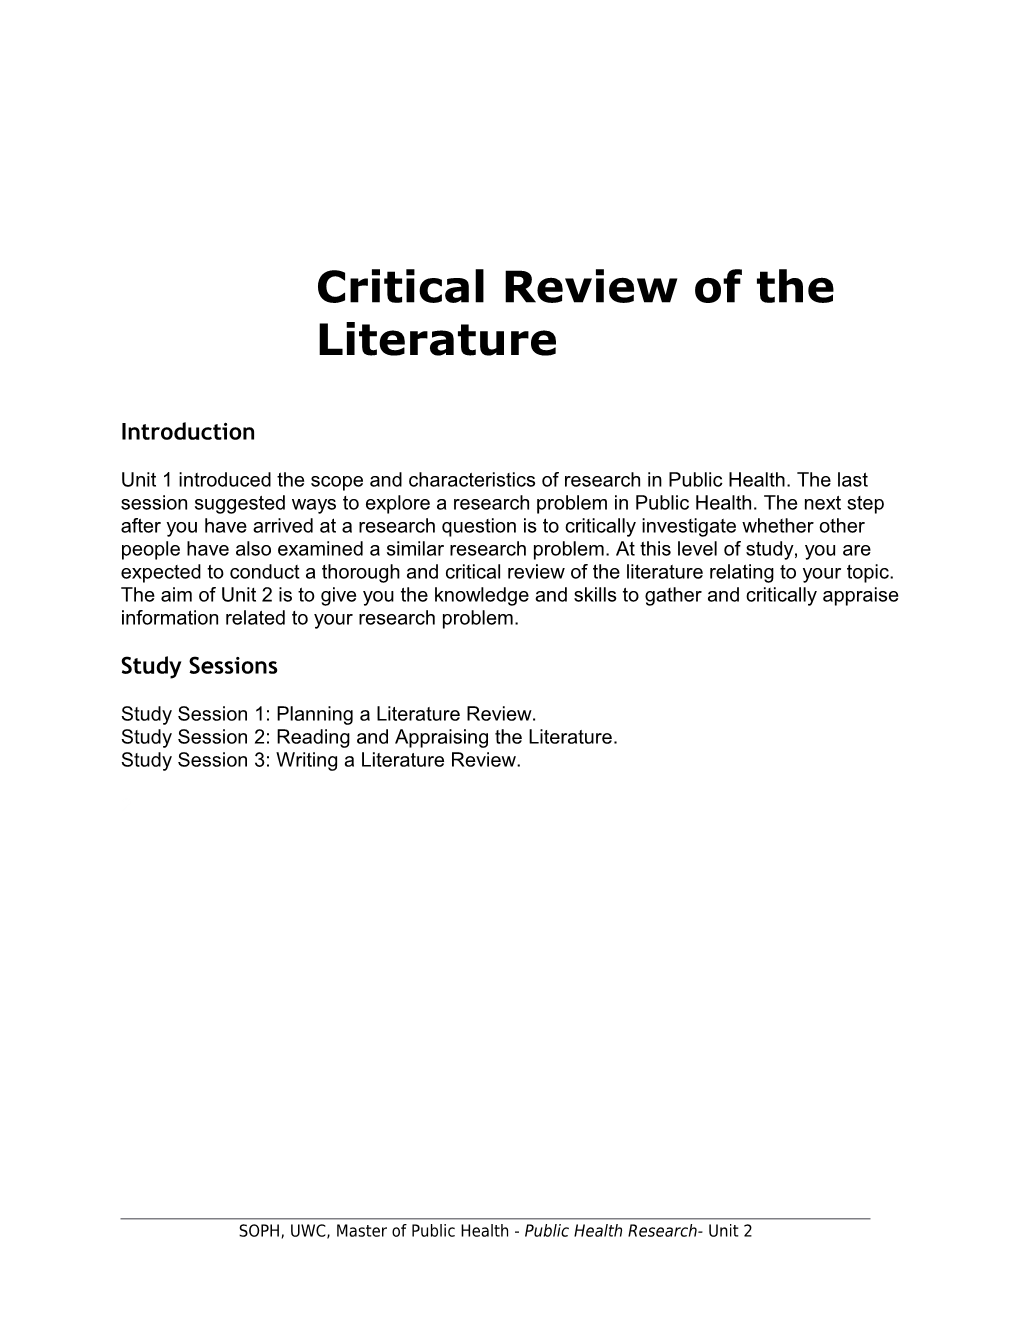 Critical Review of the Literature